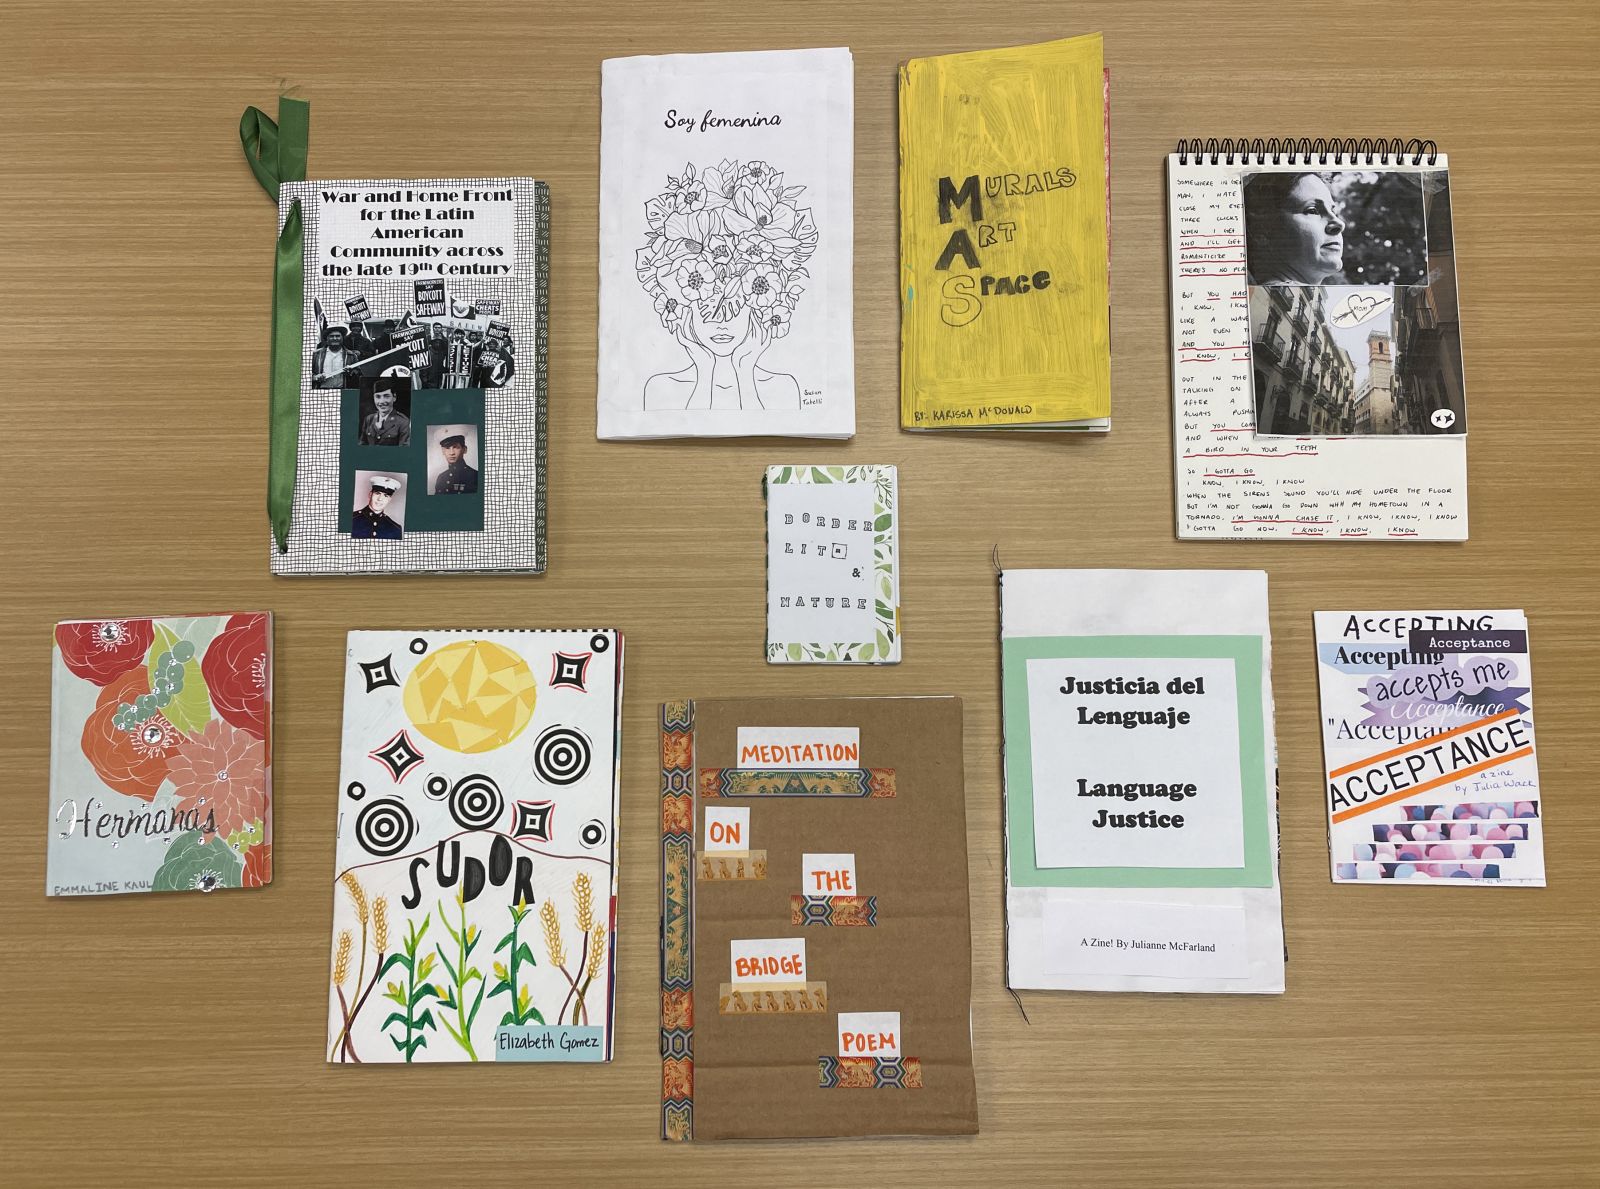 the covers of zines handmade by William & Mary students